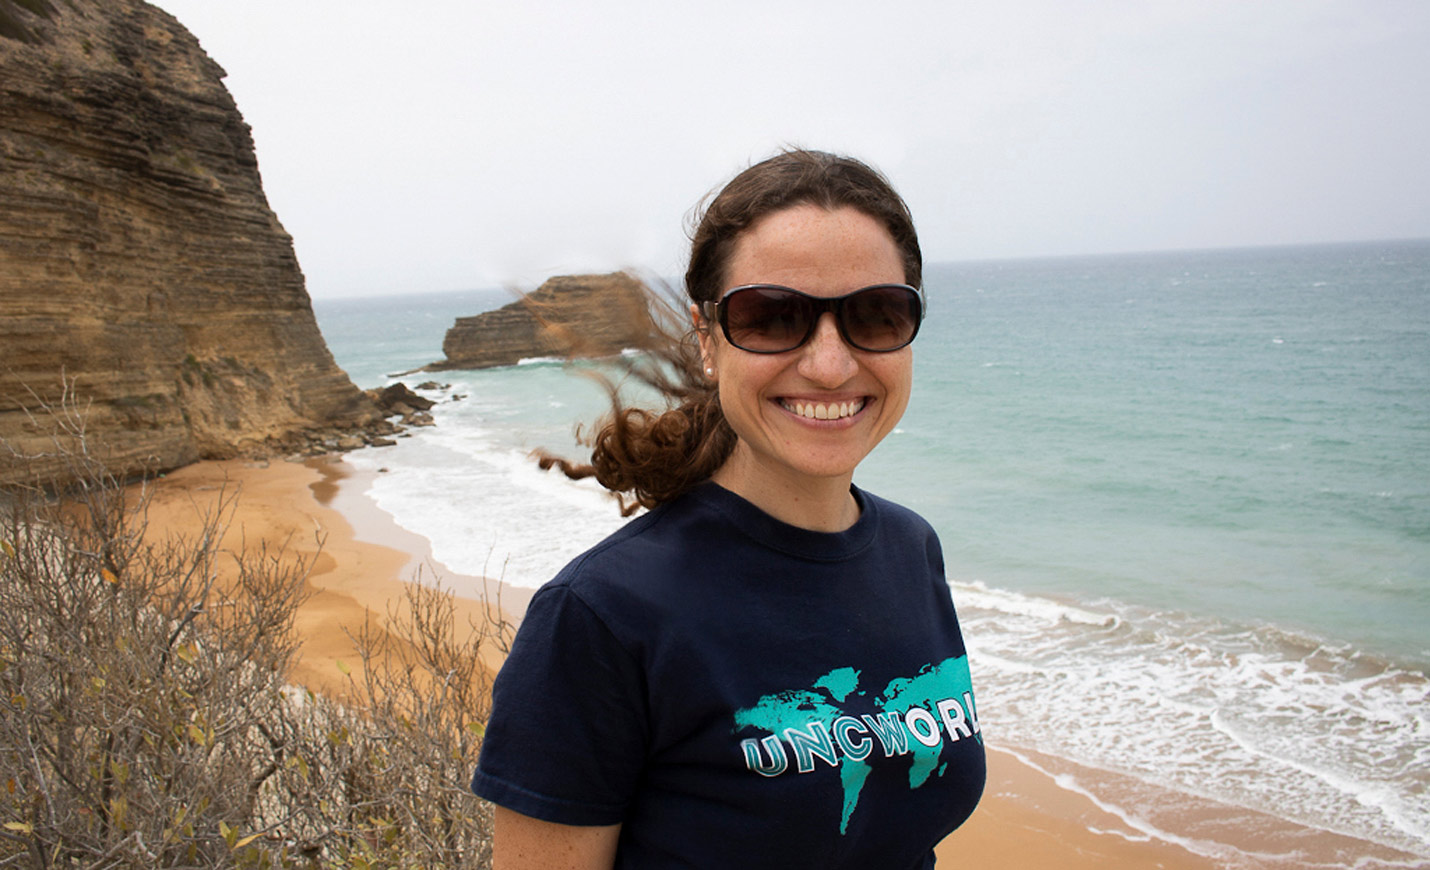 A woman wearing a UNCW World T-shirt poses on a rocky beach